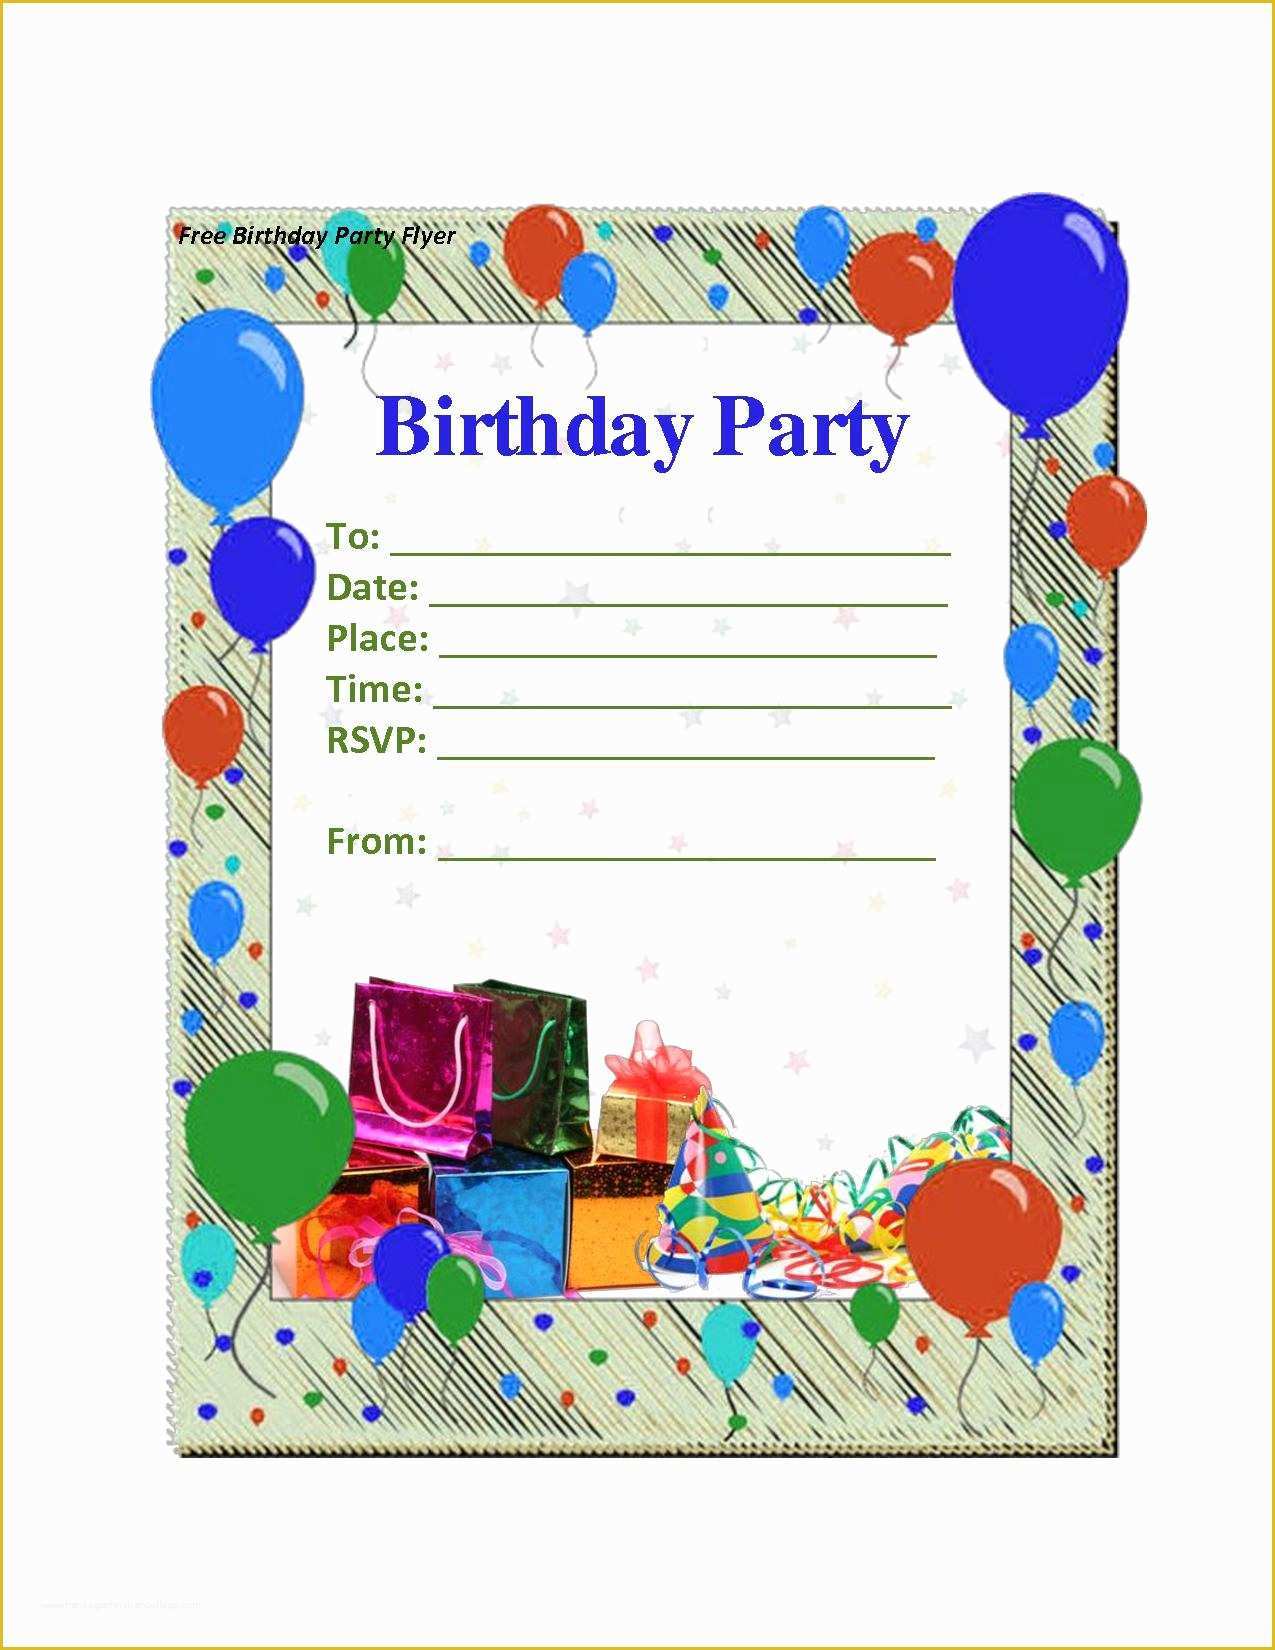 80's theme Party Invitation Templates Free Of Free Birthday Party Invitation Templates